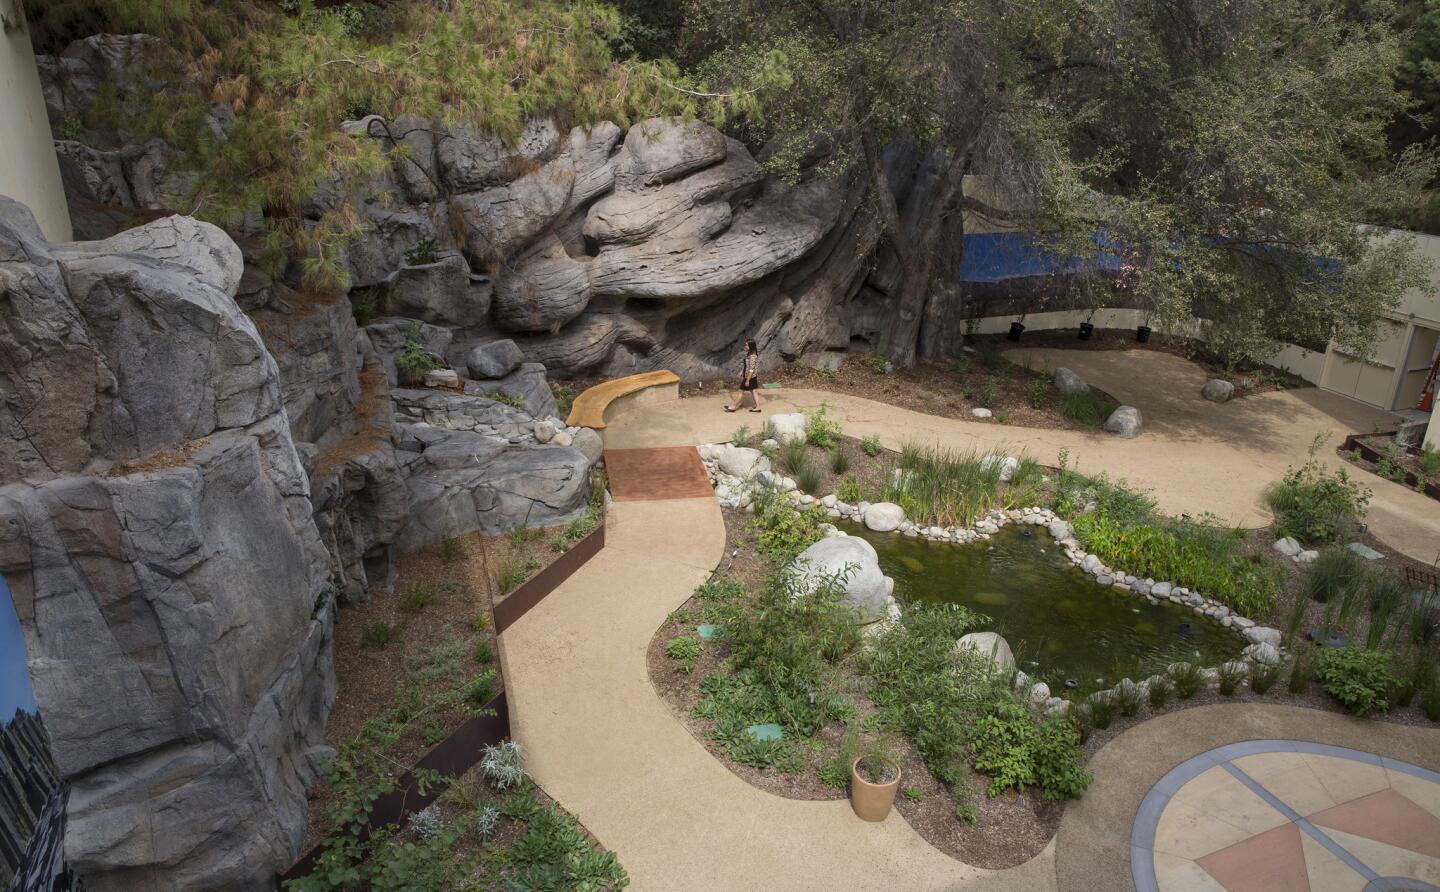 New outdoor ethnobotanical garden at the Autry Museum of the American West